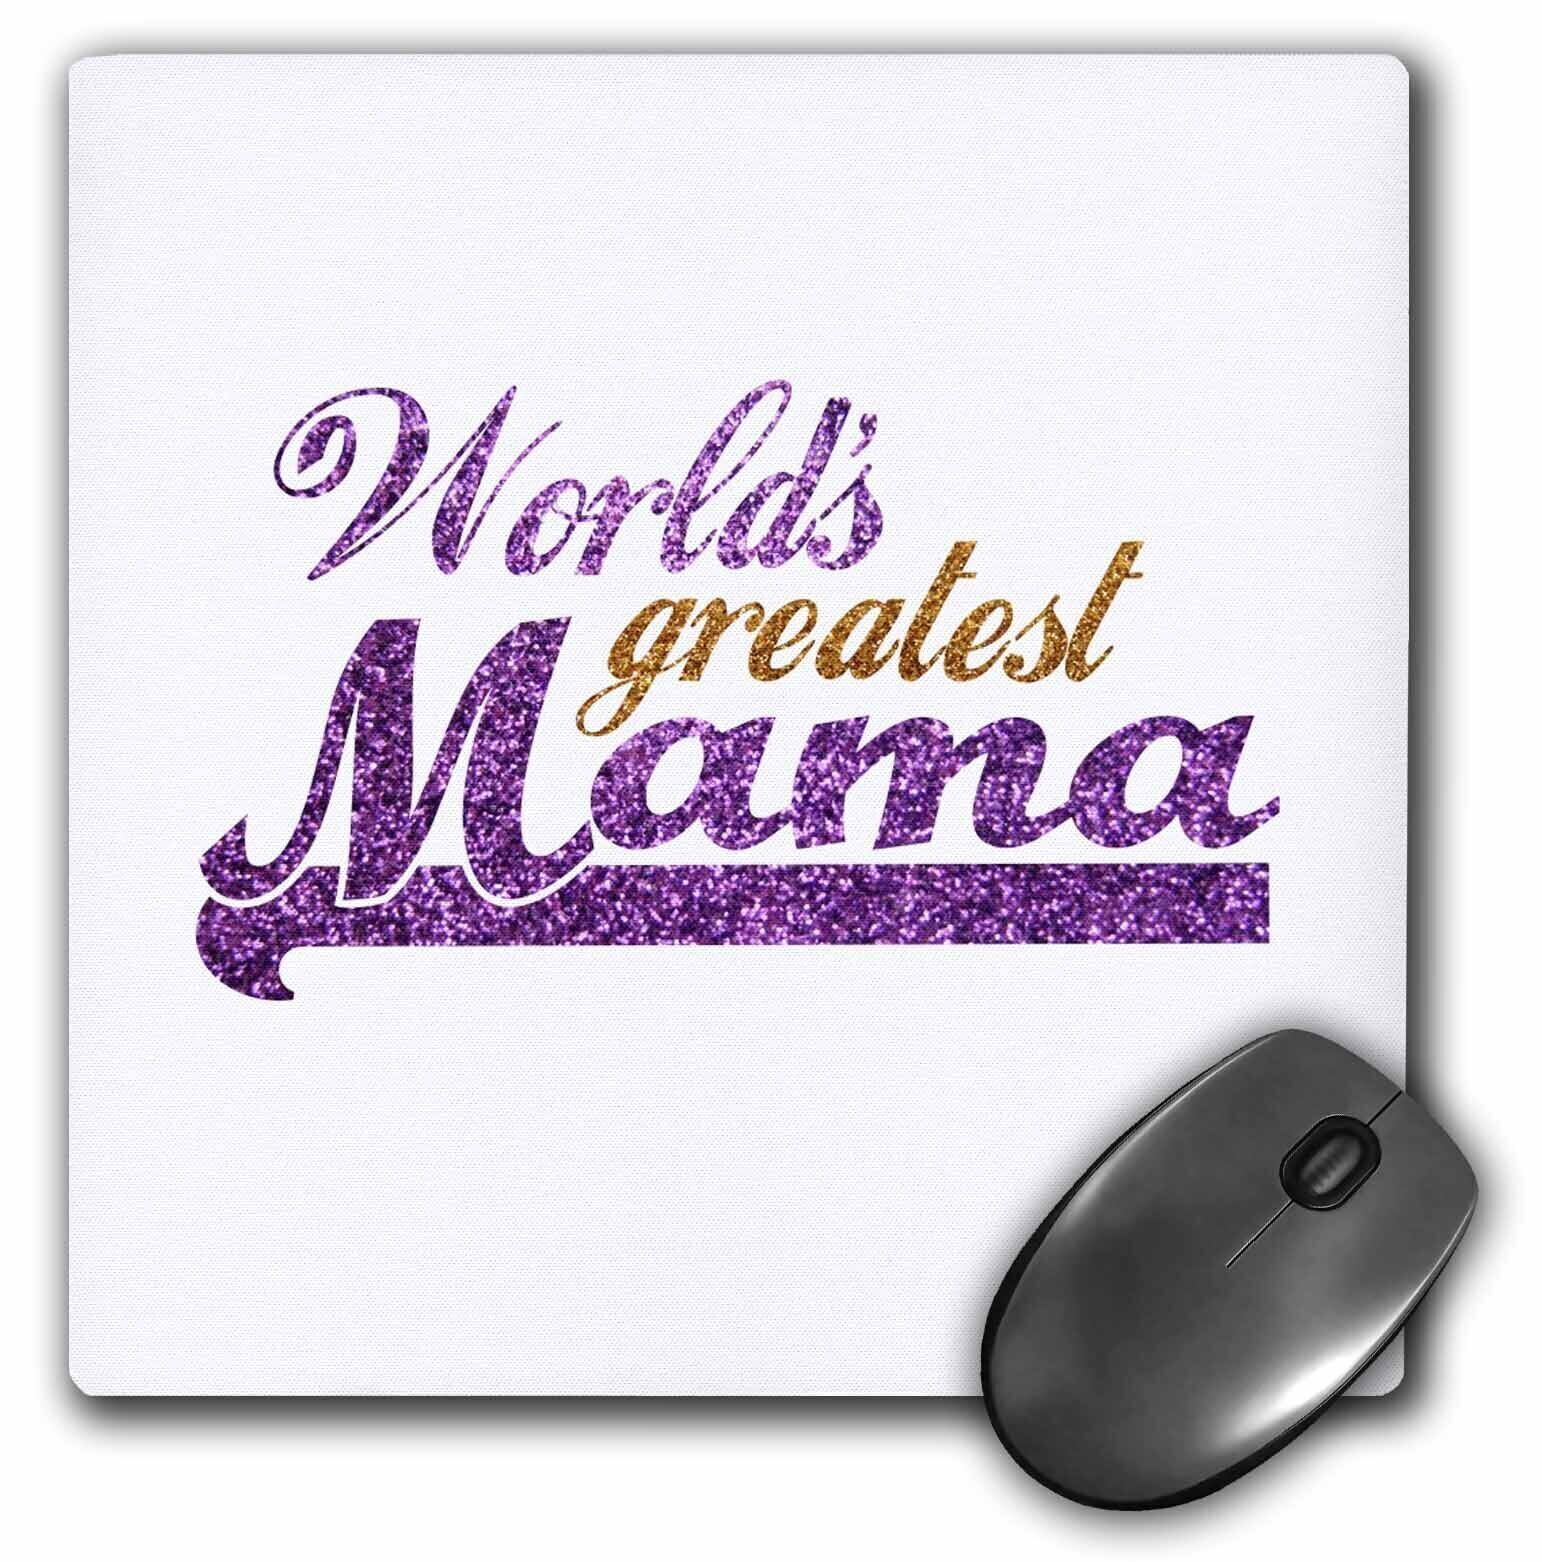 3dRose Worlds Greatest Mama - purple and gold text - Gifts for best moms - good